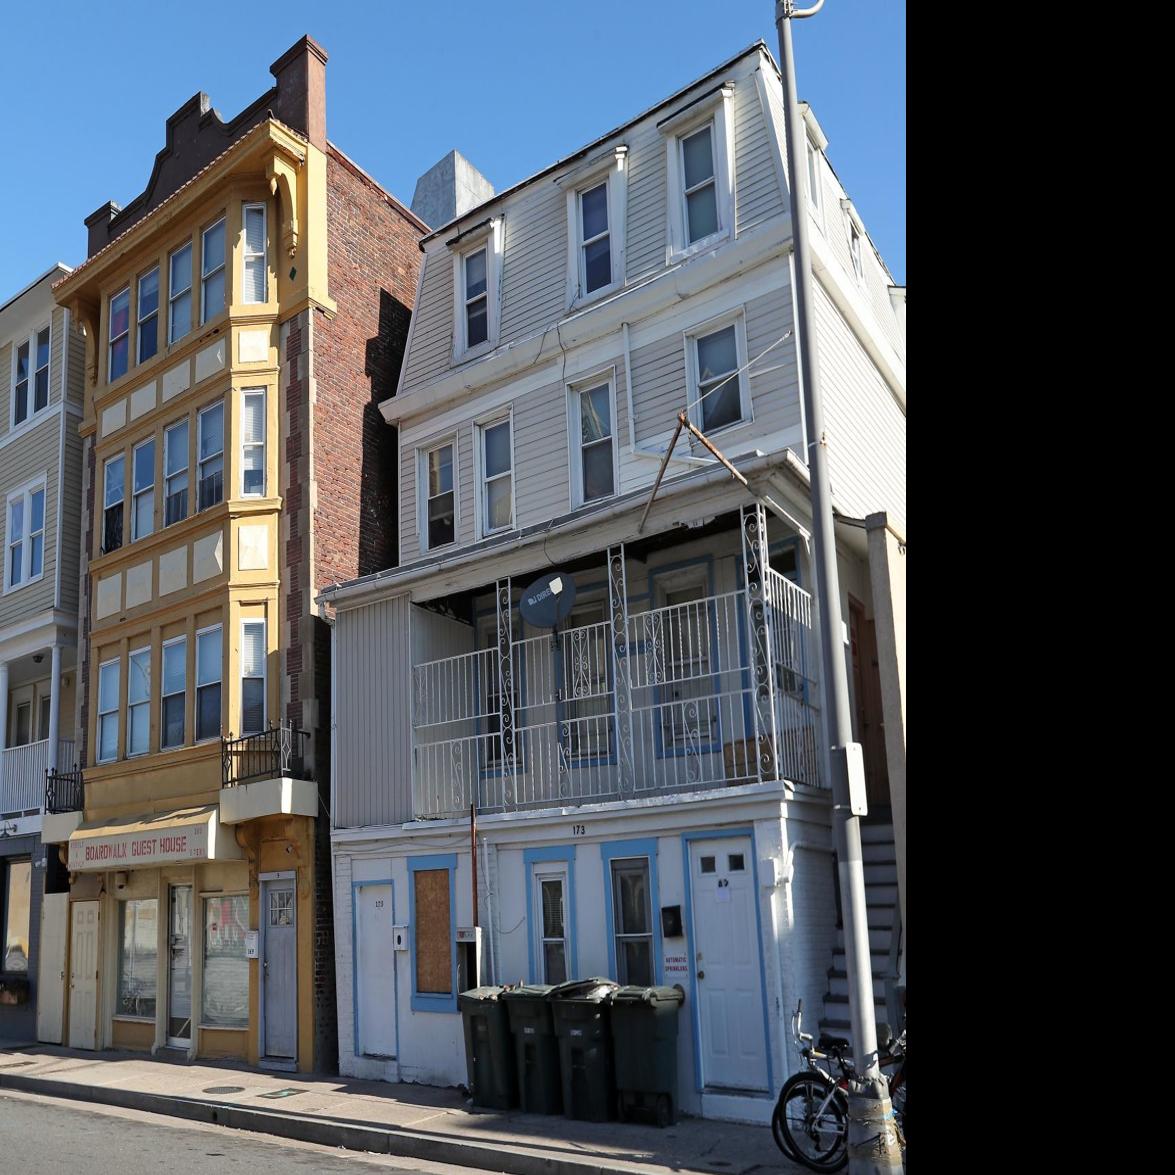 How Atlantic City S Rooming Houses Interfere With Goals Of